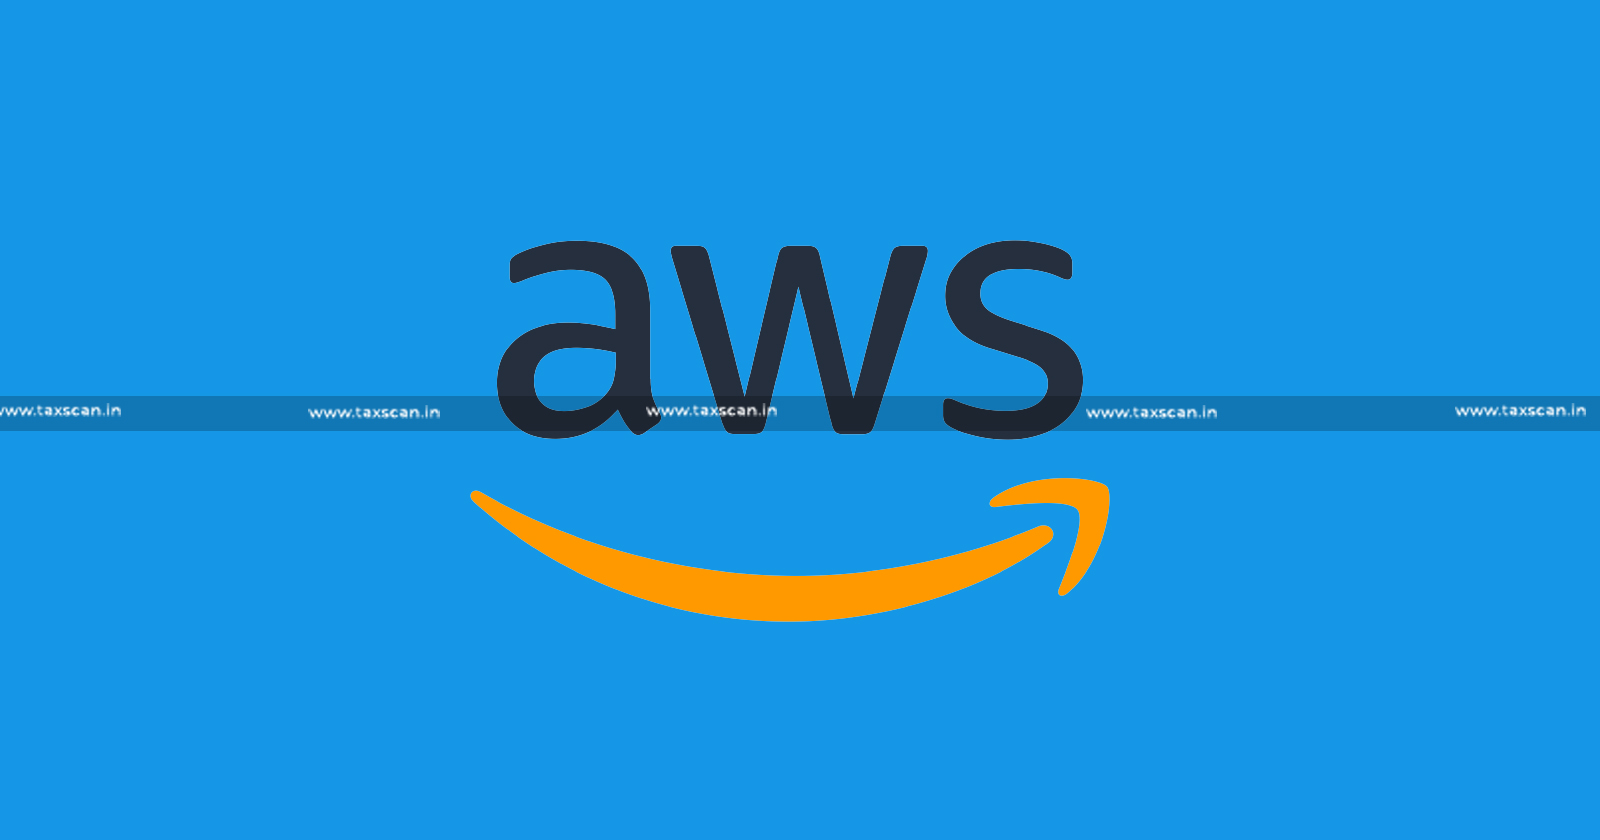 Relief - Amazon Web Services India - Relief to Amazon Web Services India - Delhi HC - Liability -Delhi High Court - taxscan